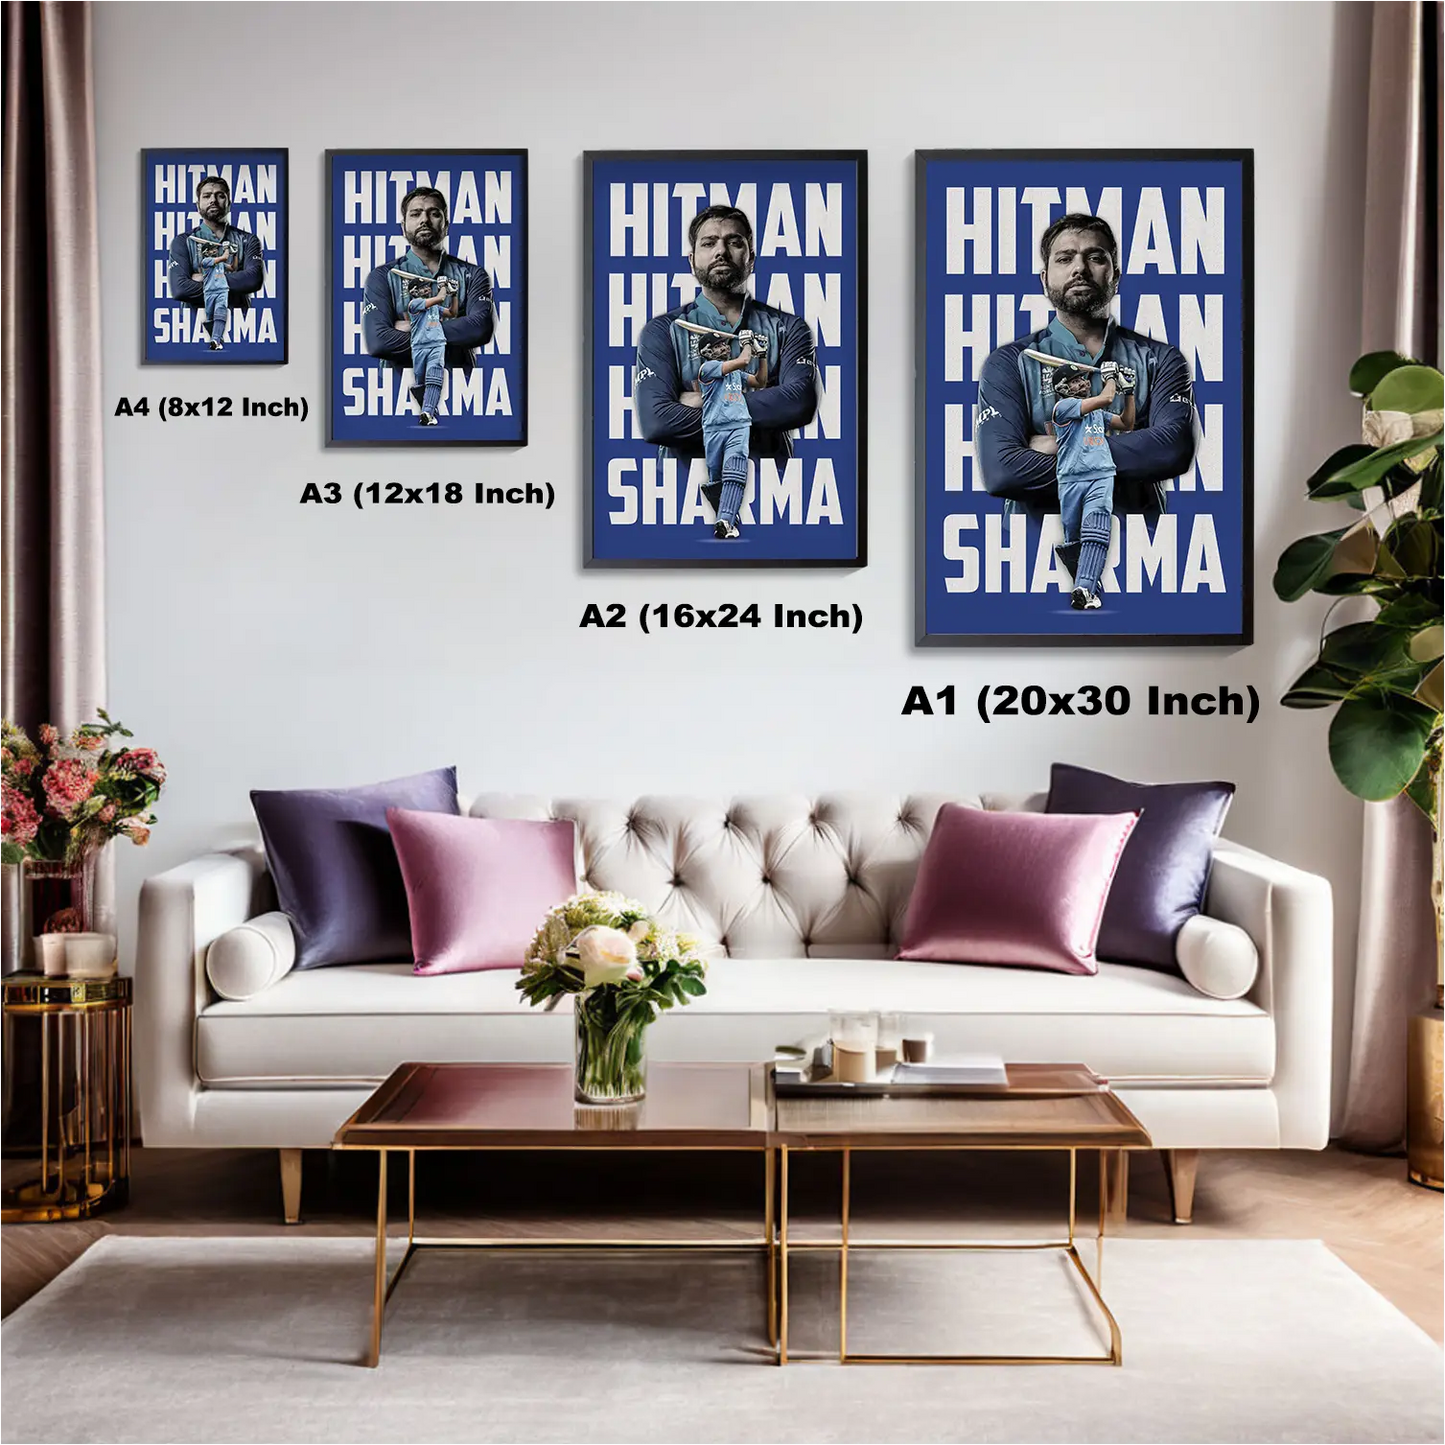 Rohit Sharma - The Hit Man Poster | Frame | Canvas